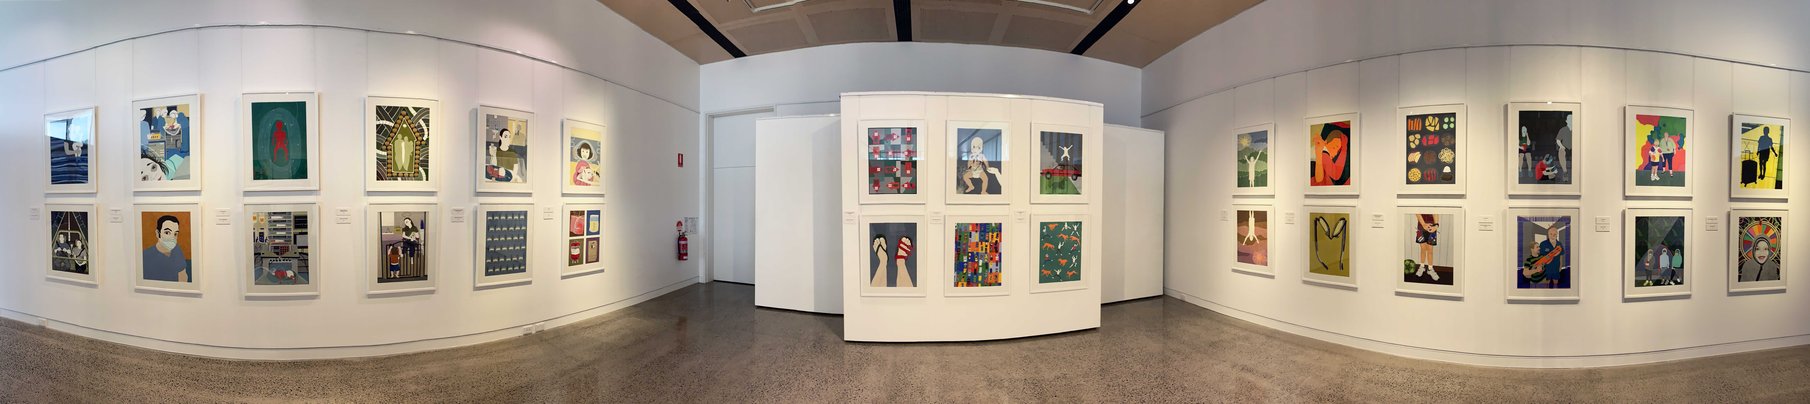 Early Installation View